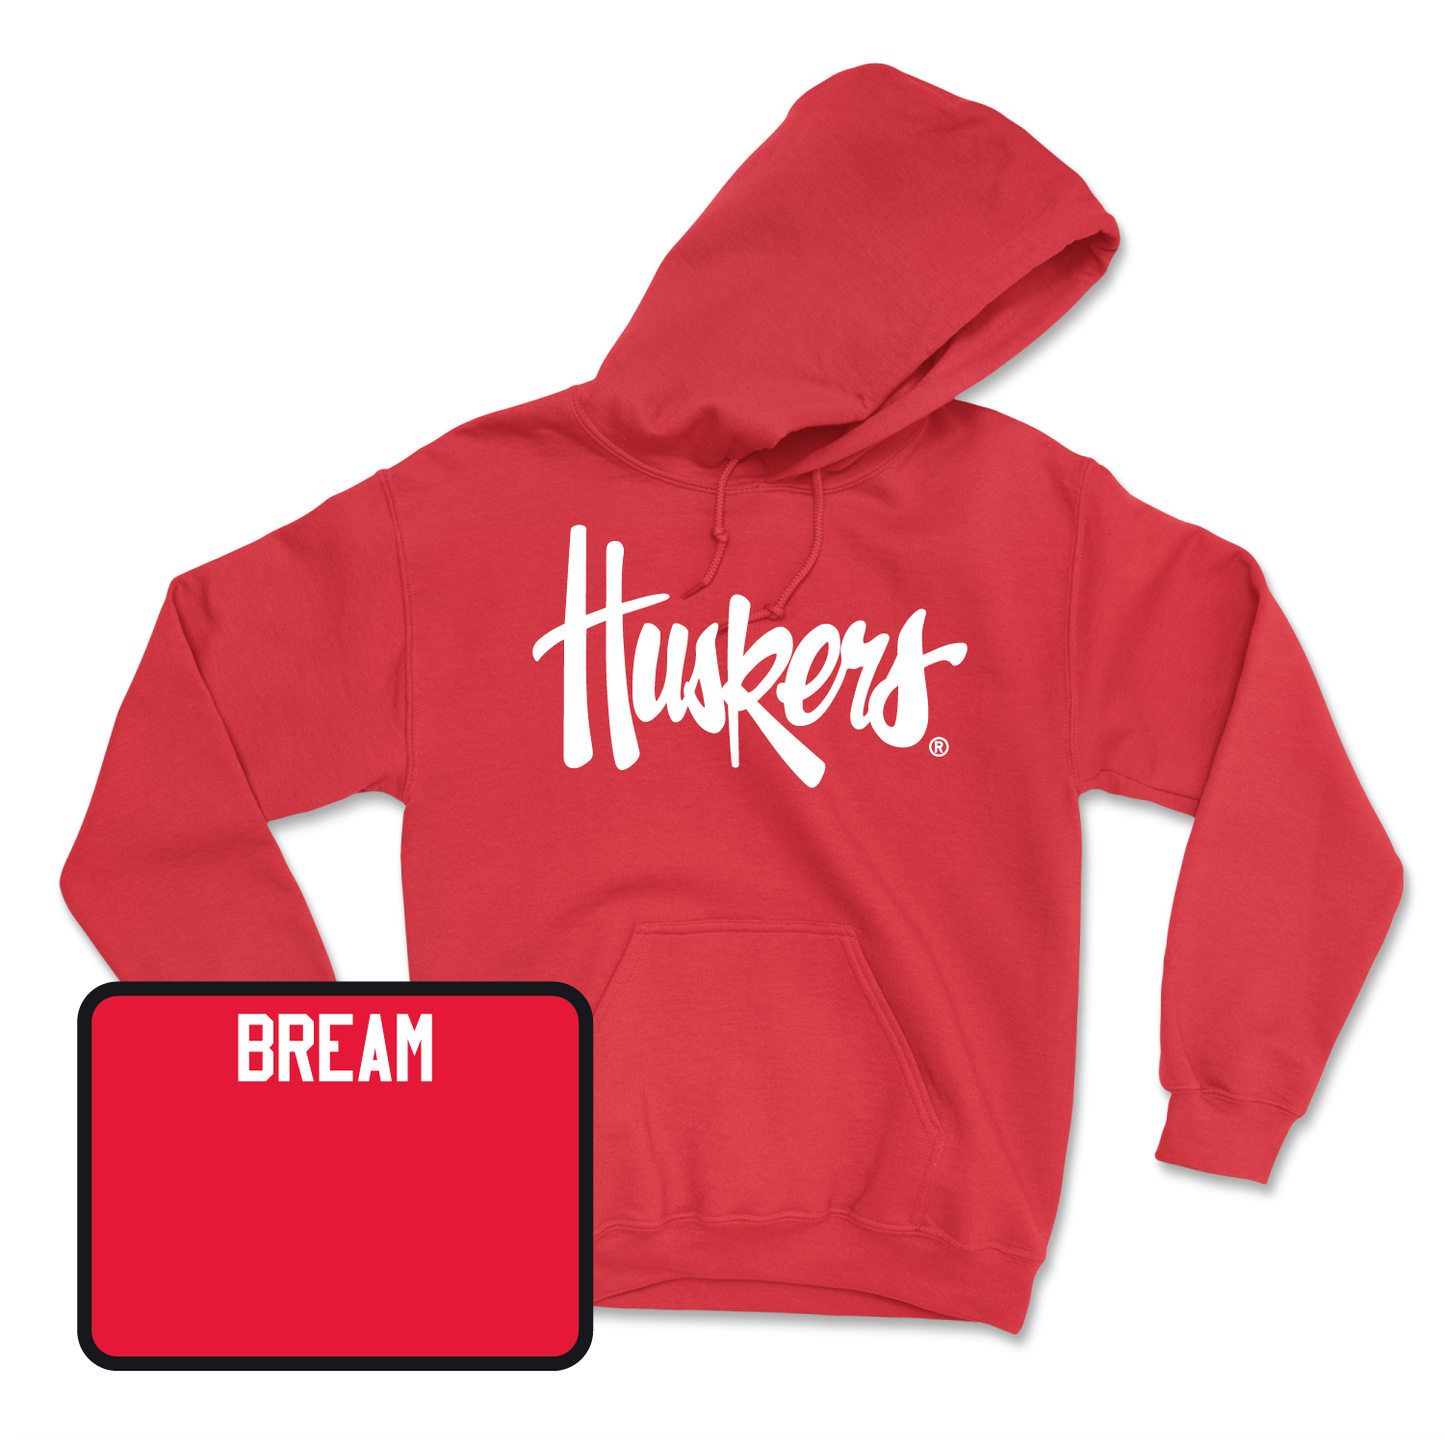 Red Women's Golf Huskers Hoodie 2X-Large / Brooke Bream